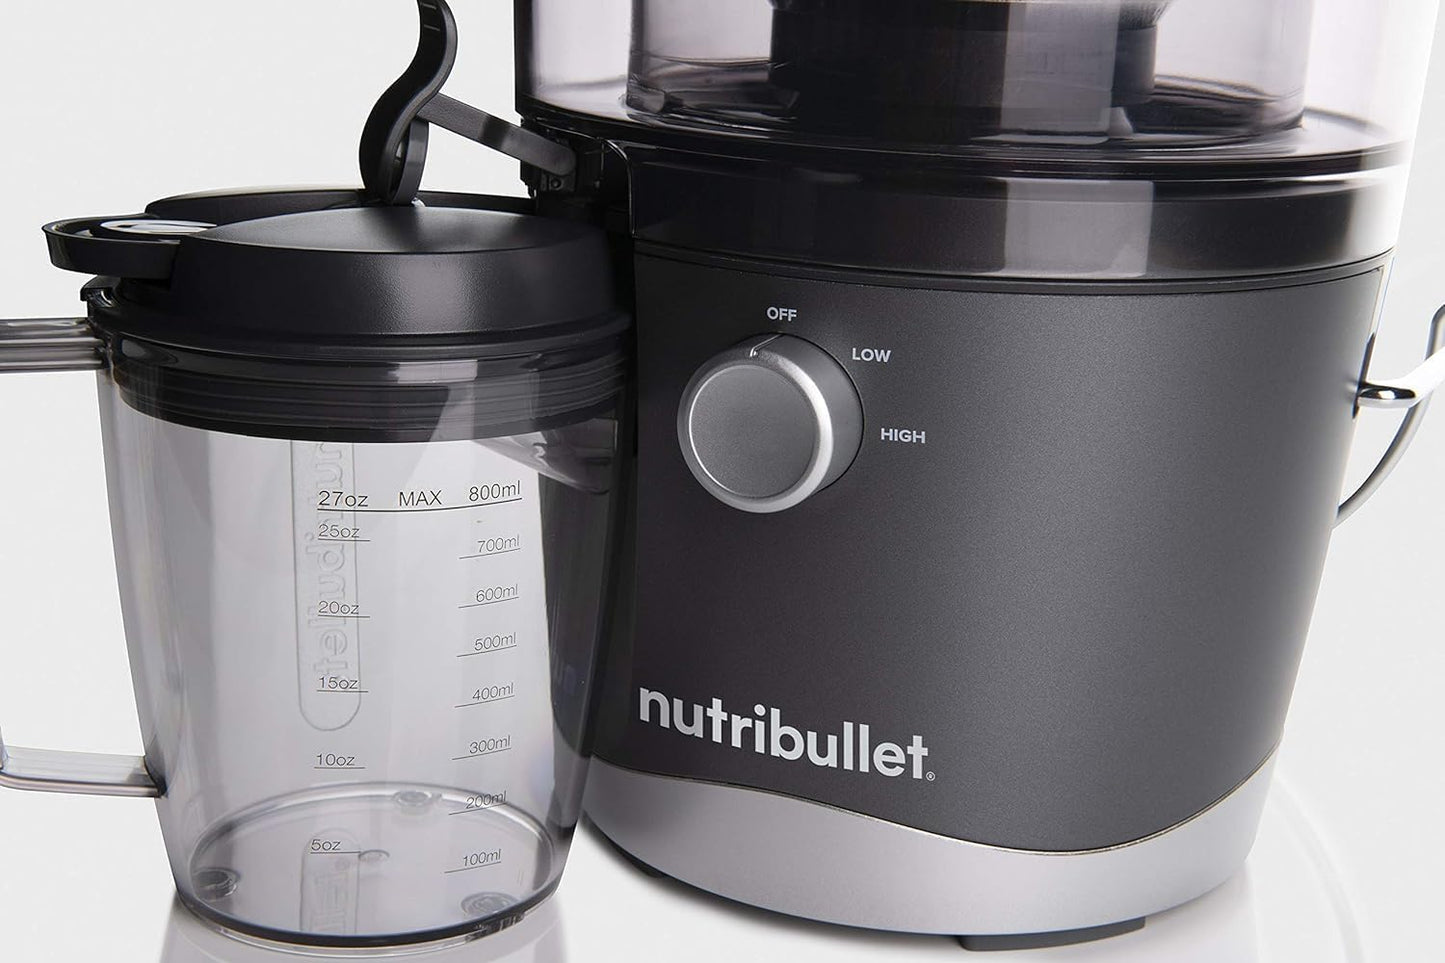 NutriBullet Juicer Centrifugal Juicer Machine for Fruit, Vegetables, and Food Prep, 27 Ounces/1.5 Liters, 800 Watts, Gray NBJ50100